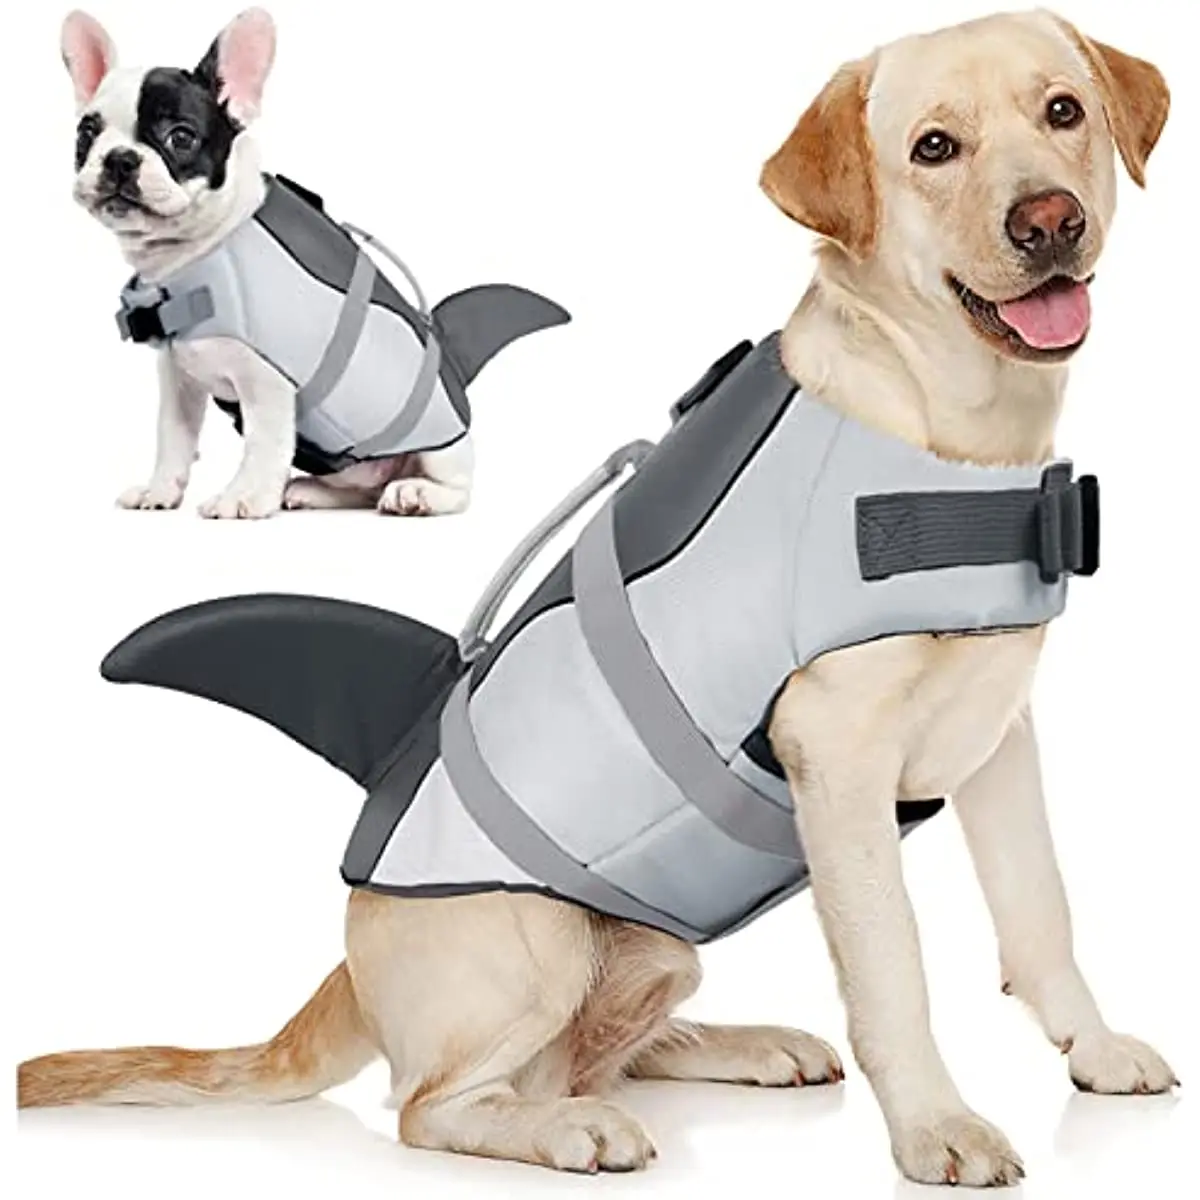 

Dog Life Jacket Ripstop Dog Lifesaver Shark Vests Adjustable Preserver with Durable Rescue Handle Pet Dogs Safety Swimsuit